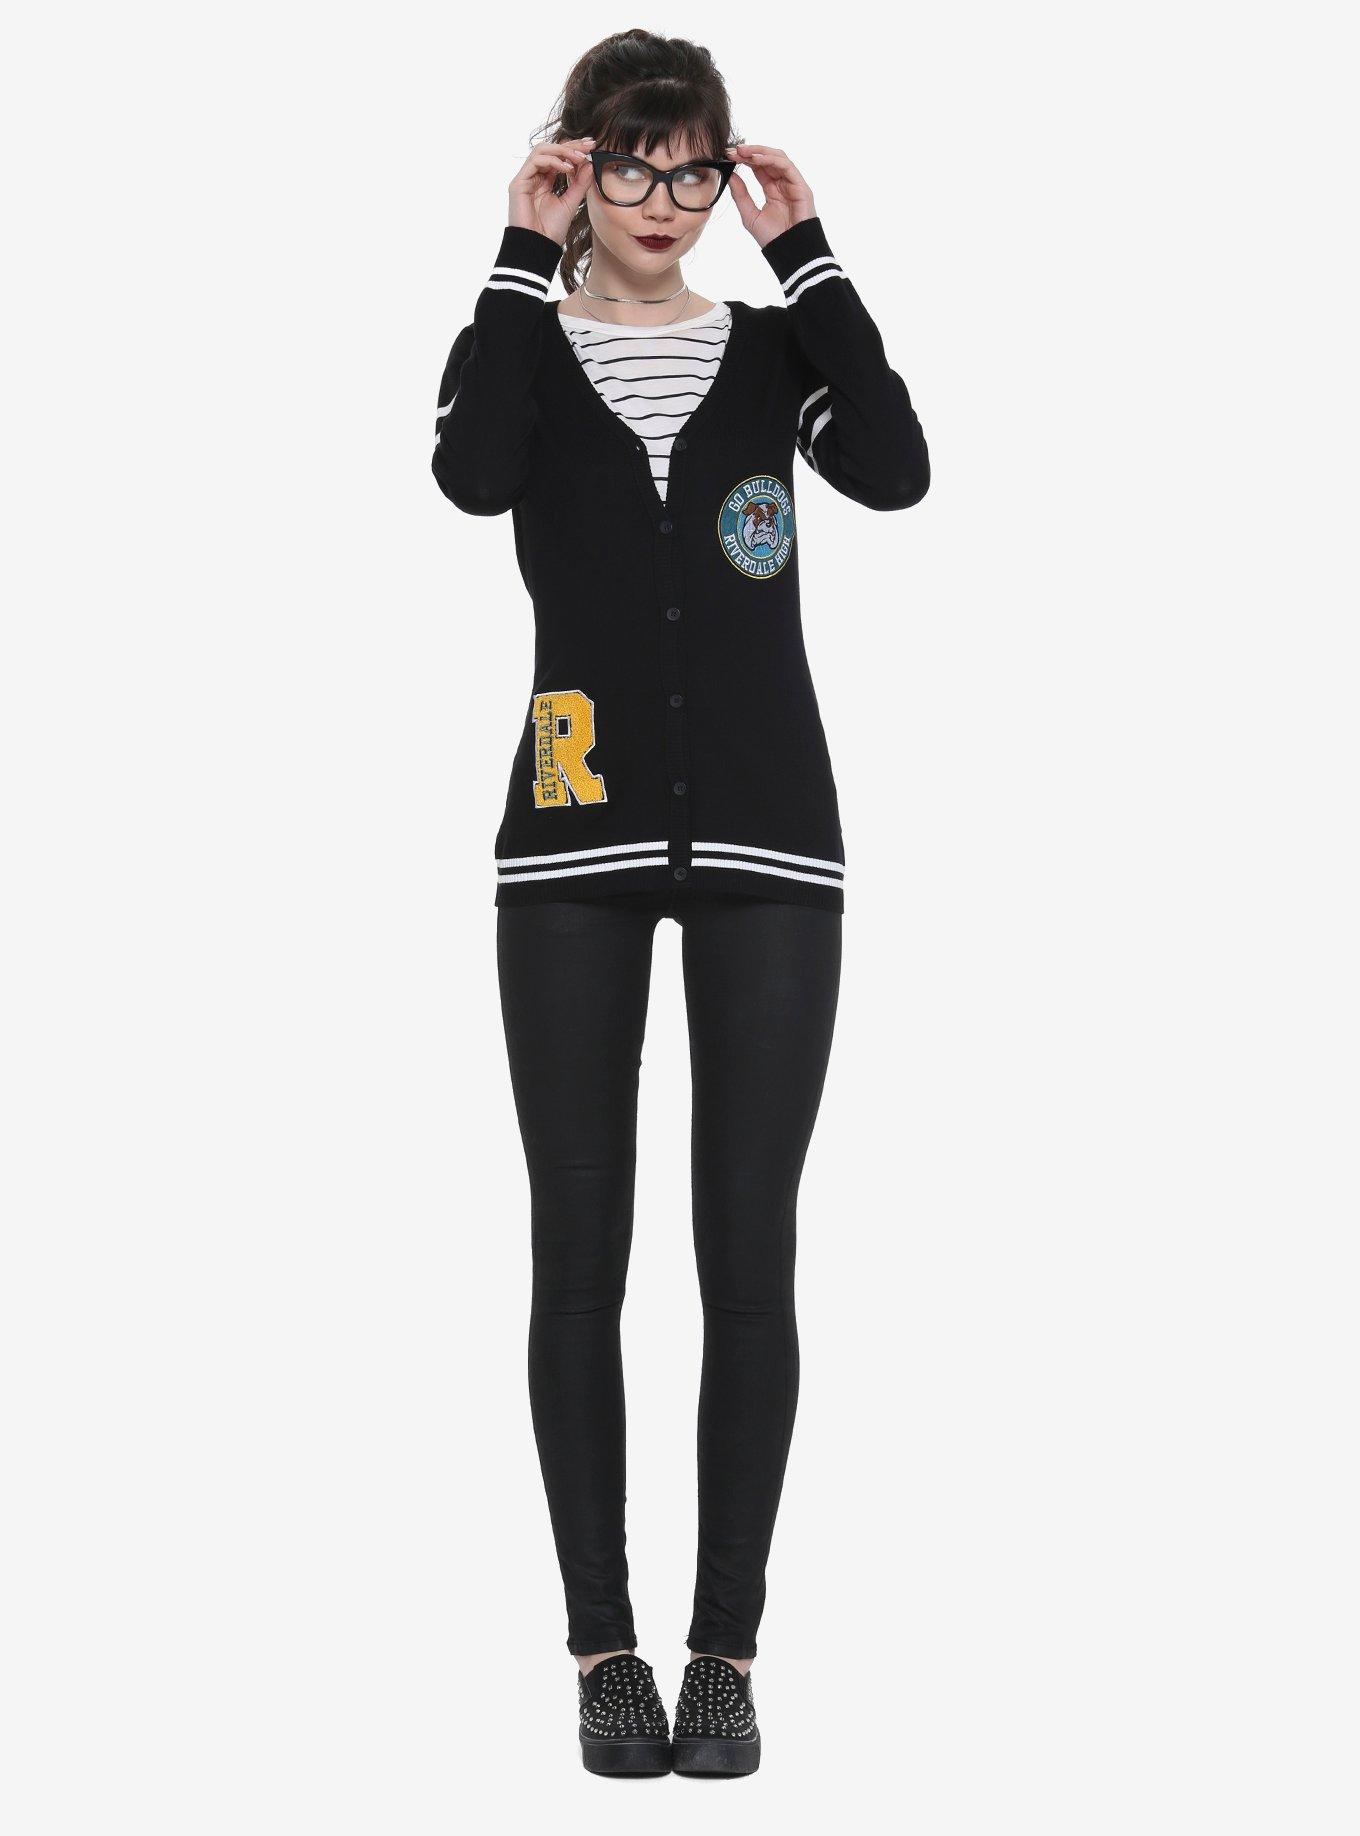 Riverdale Patches Girls Cardigan Hot Topic Exclusive, BLACK, alternate